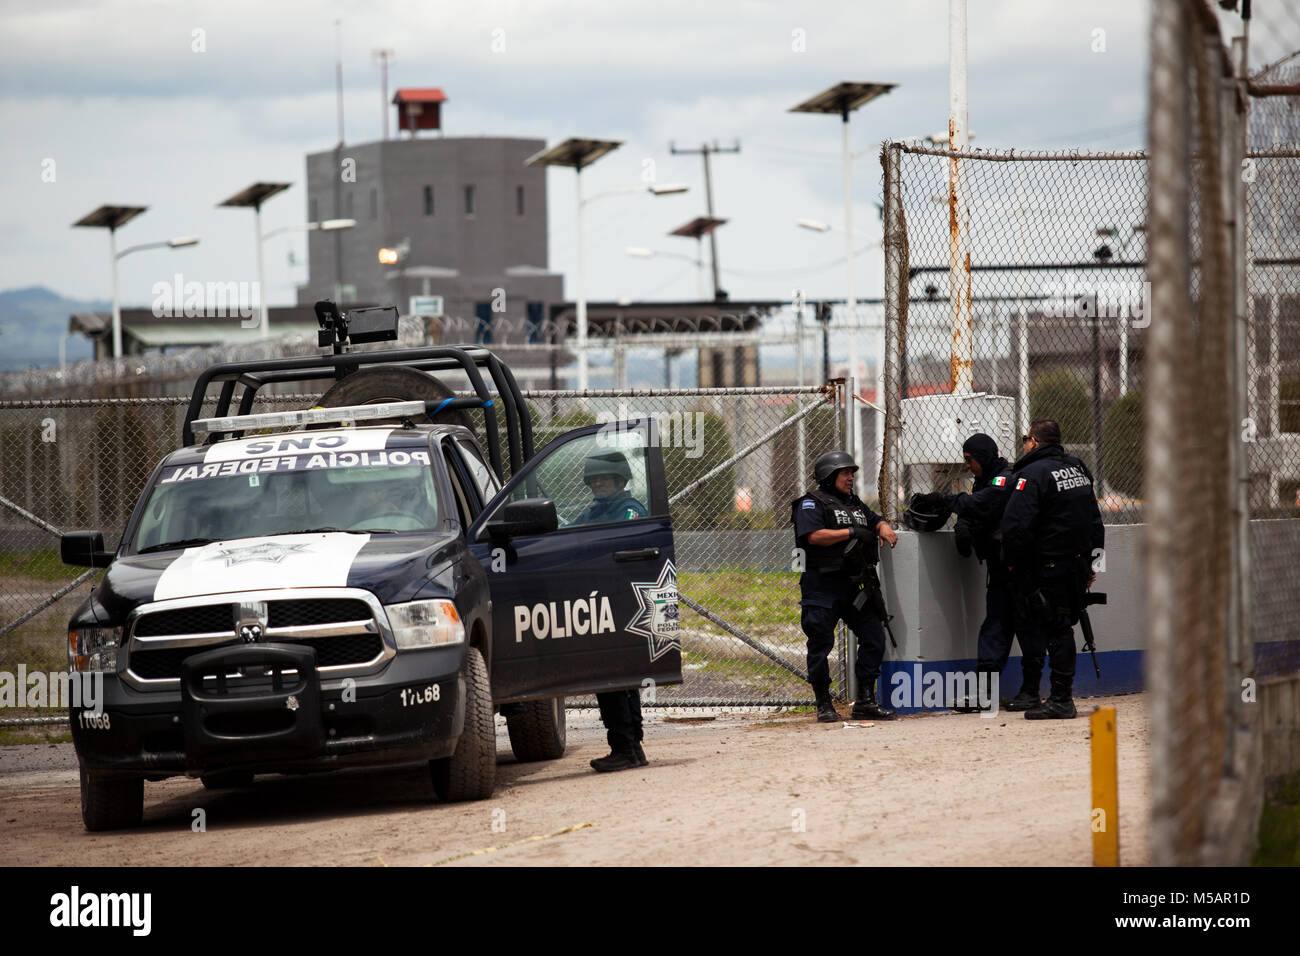 Federal Police and other authorities exit the Altiplano maximum-security prison near Toluca, Mexico on Sunday, July 12, 2015. The notorious cartel leader Joaquin 'El Chapo' Guzman escaped from this high security prison the night before, the second time he has escaped a Mexican prison. Stock Photo